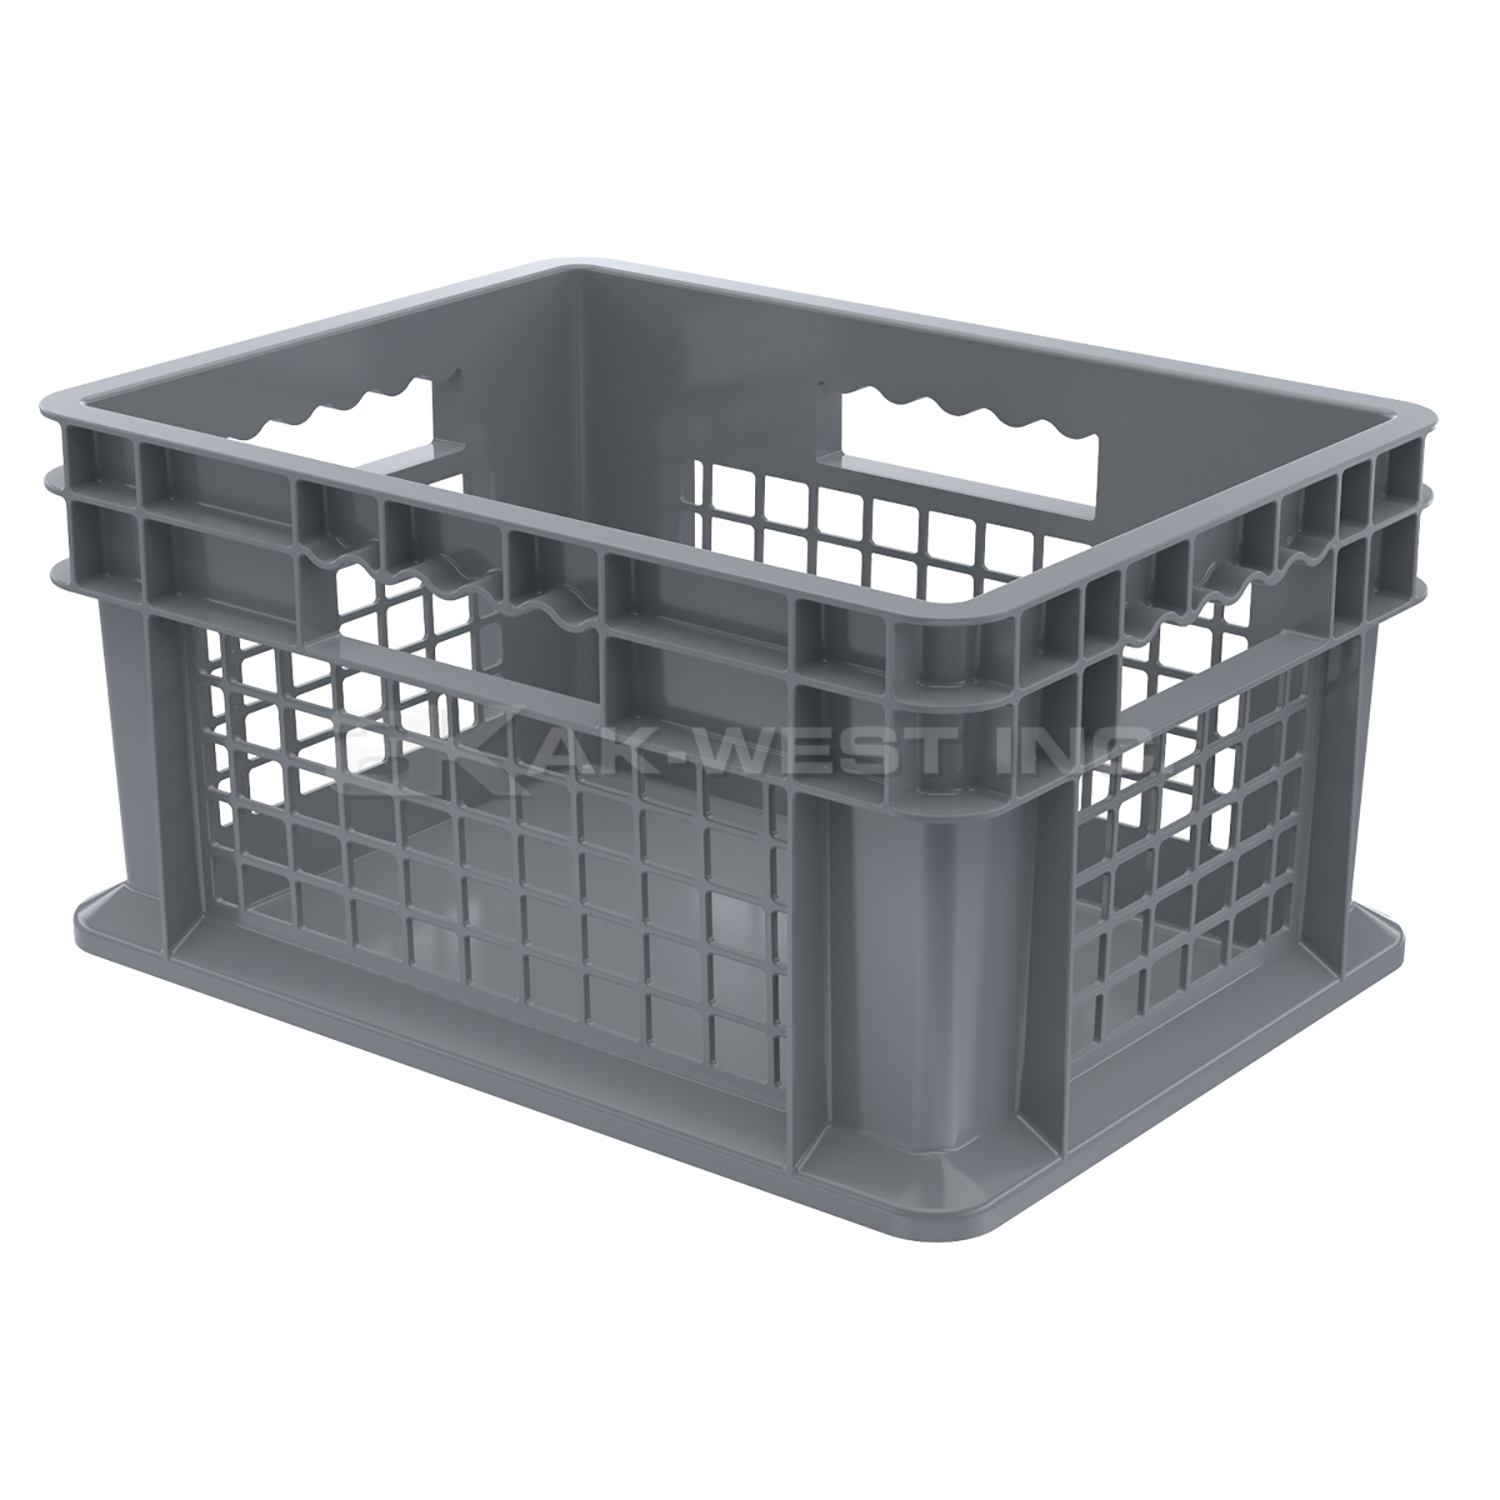 Grey, 15-3/4" x 11-3/4" x 8-1/4", Vented Side/Solid Base, Straight Wall Container (12 Per Carton)